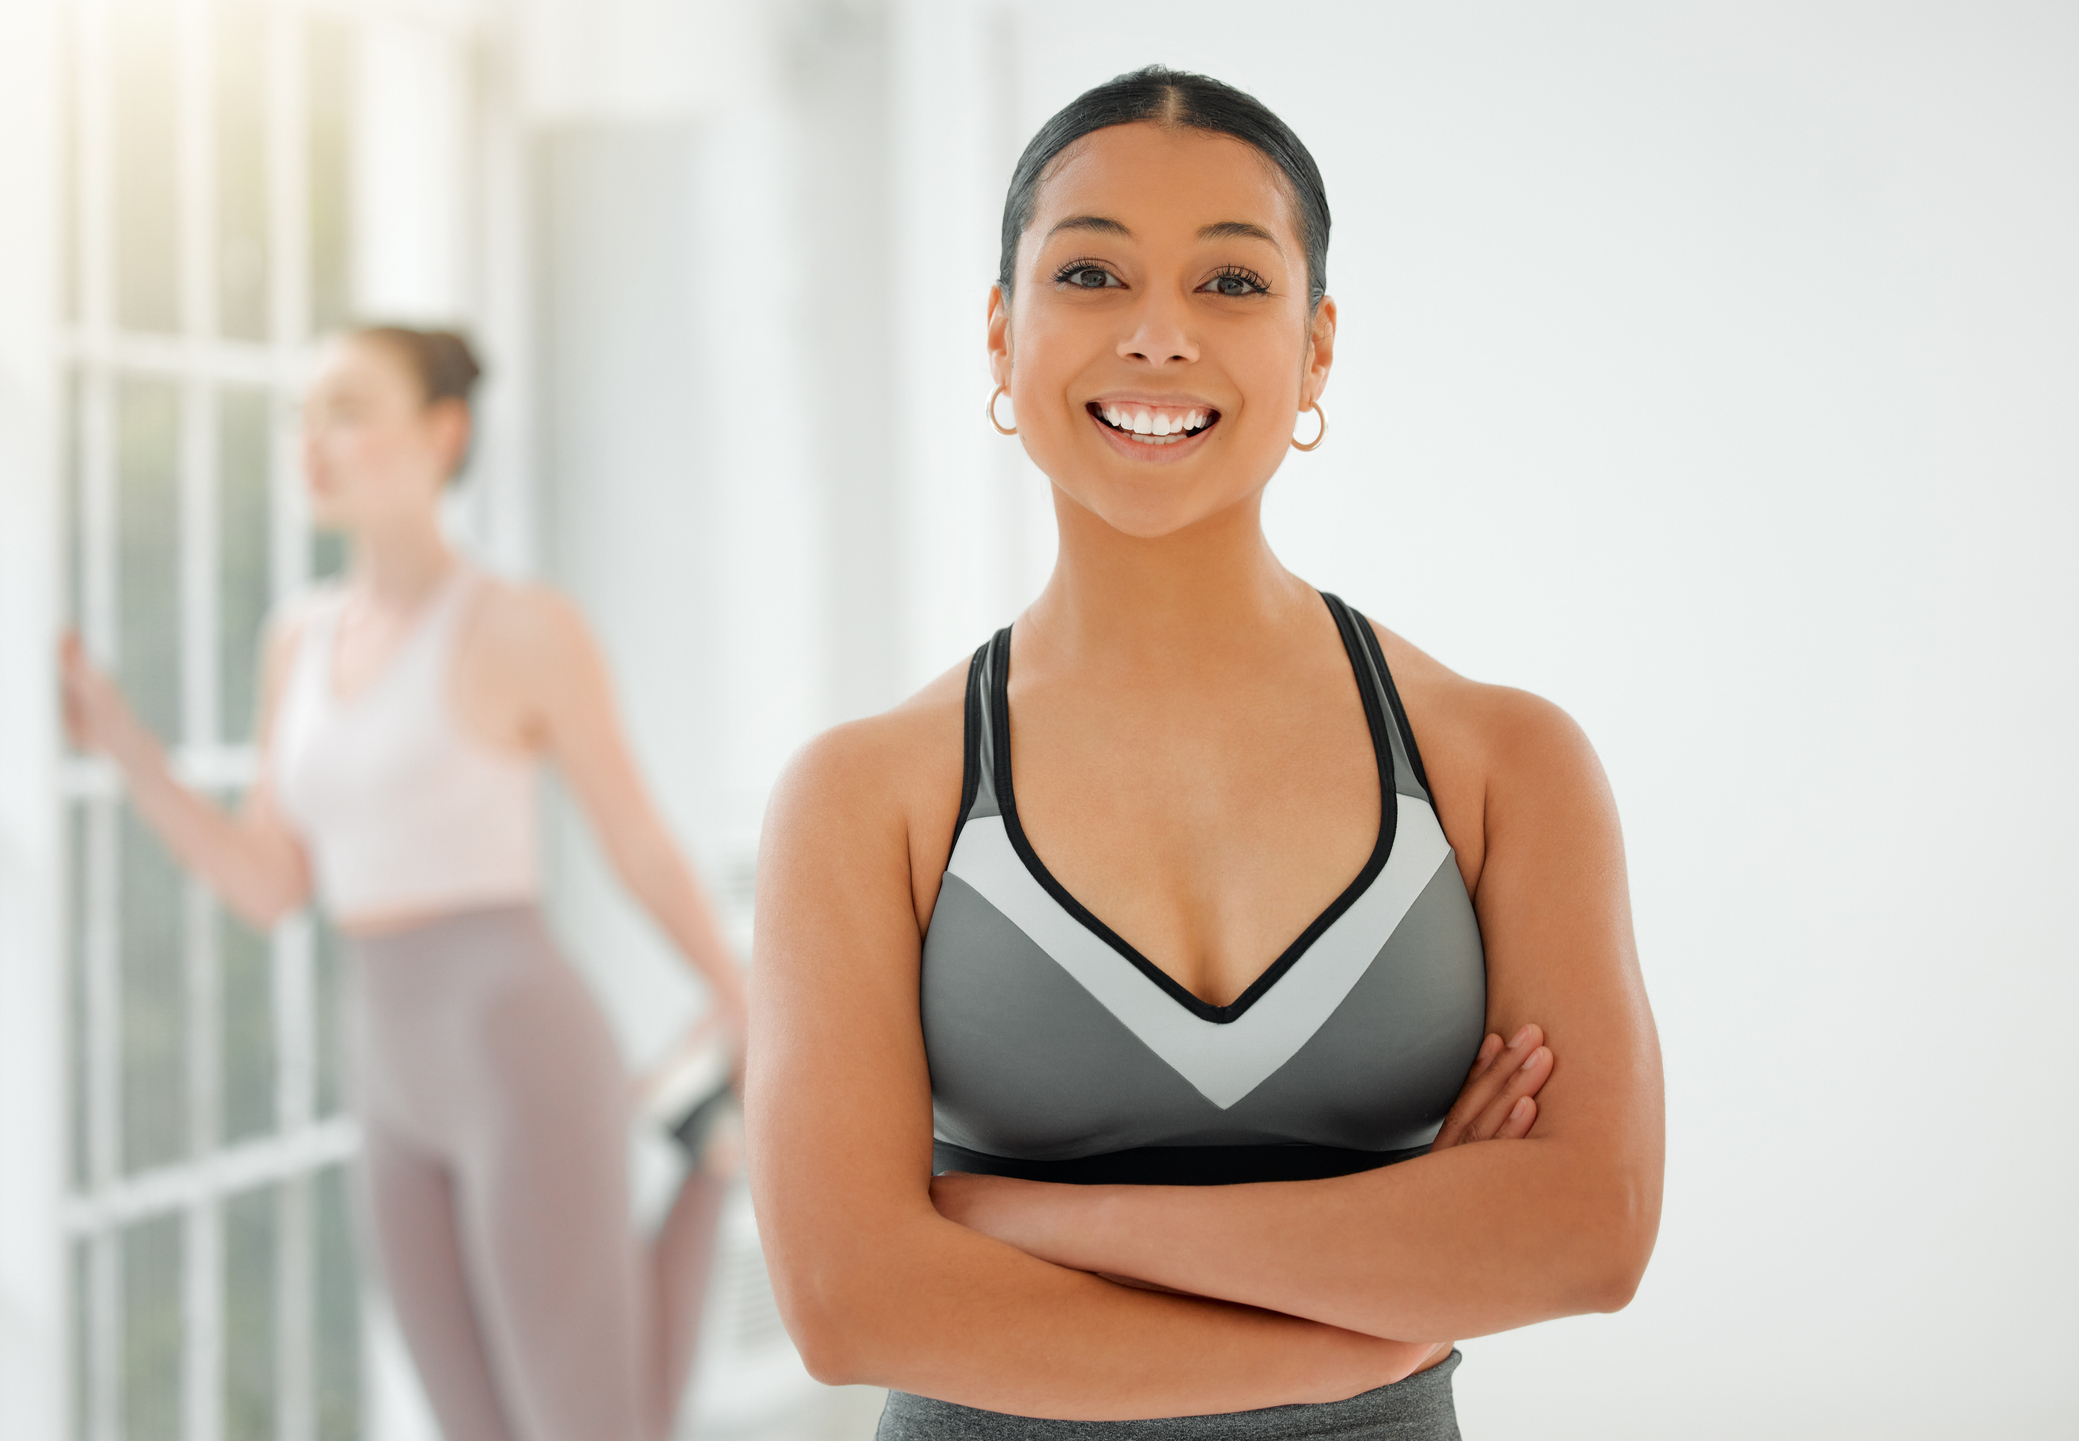 A young woman in a gray halter-top leotard is shown from the waist up in a brightly lit studio. She smiles widely at the camera and crosses her arms. Another woman in workout clothes stretches her left quadriceps and holds onto the window for support.